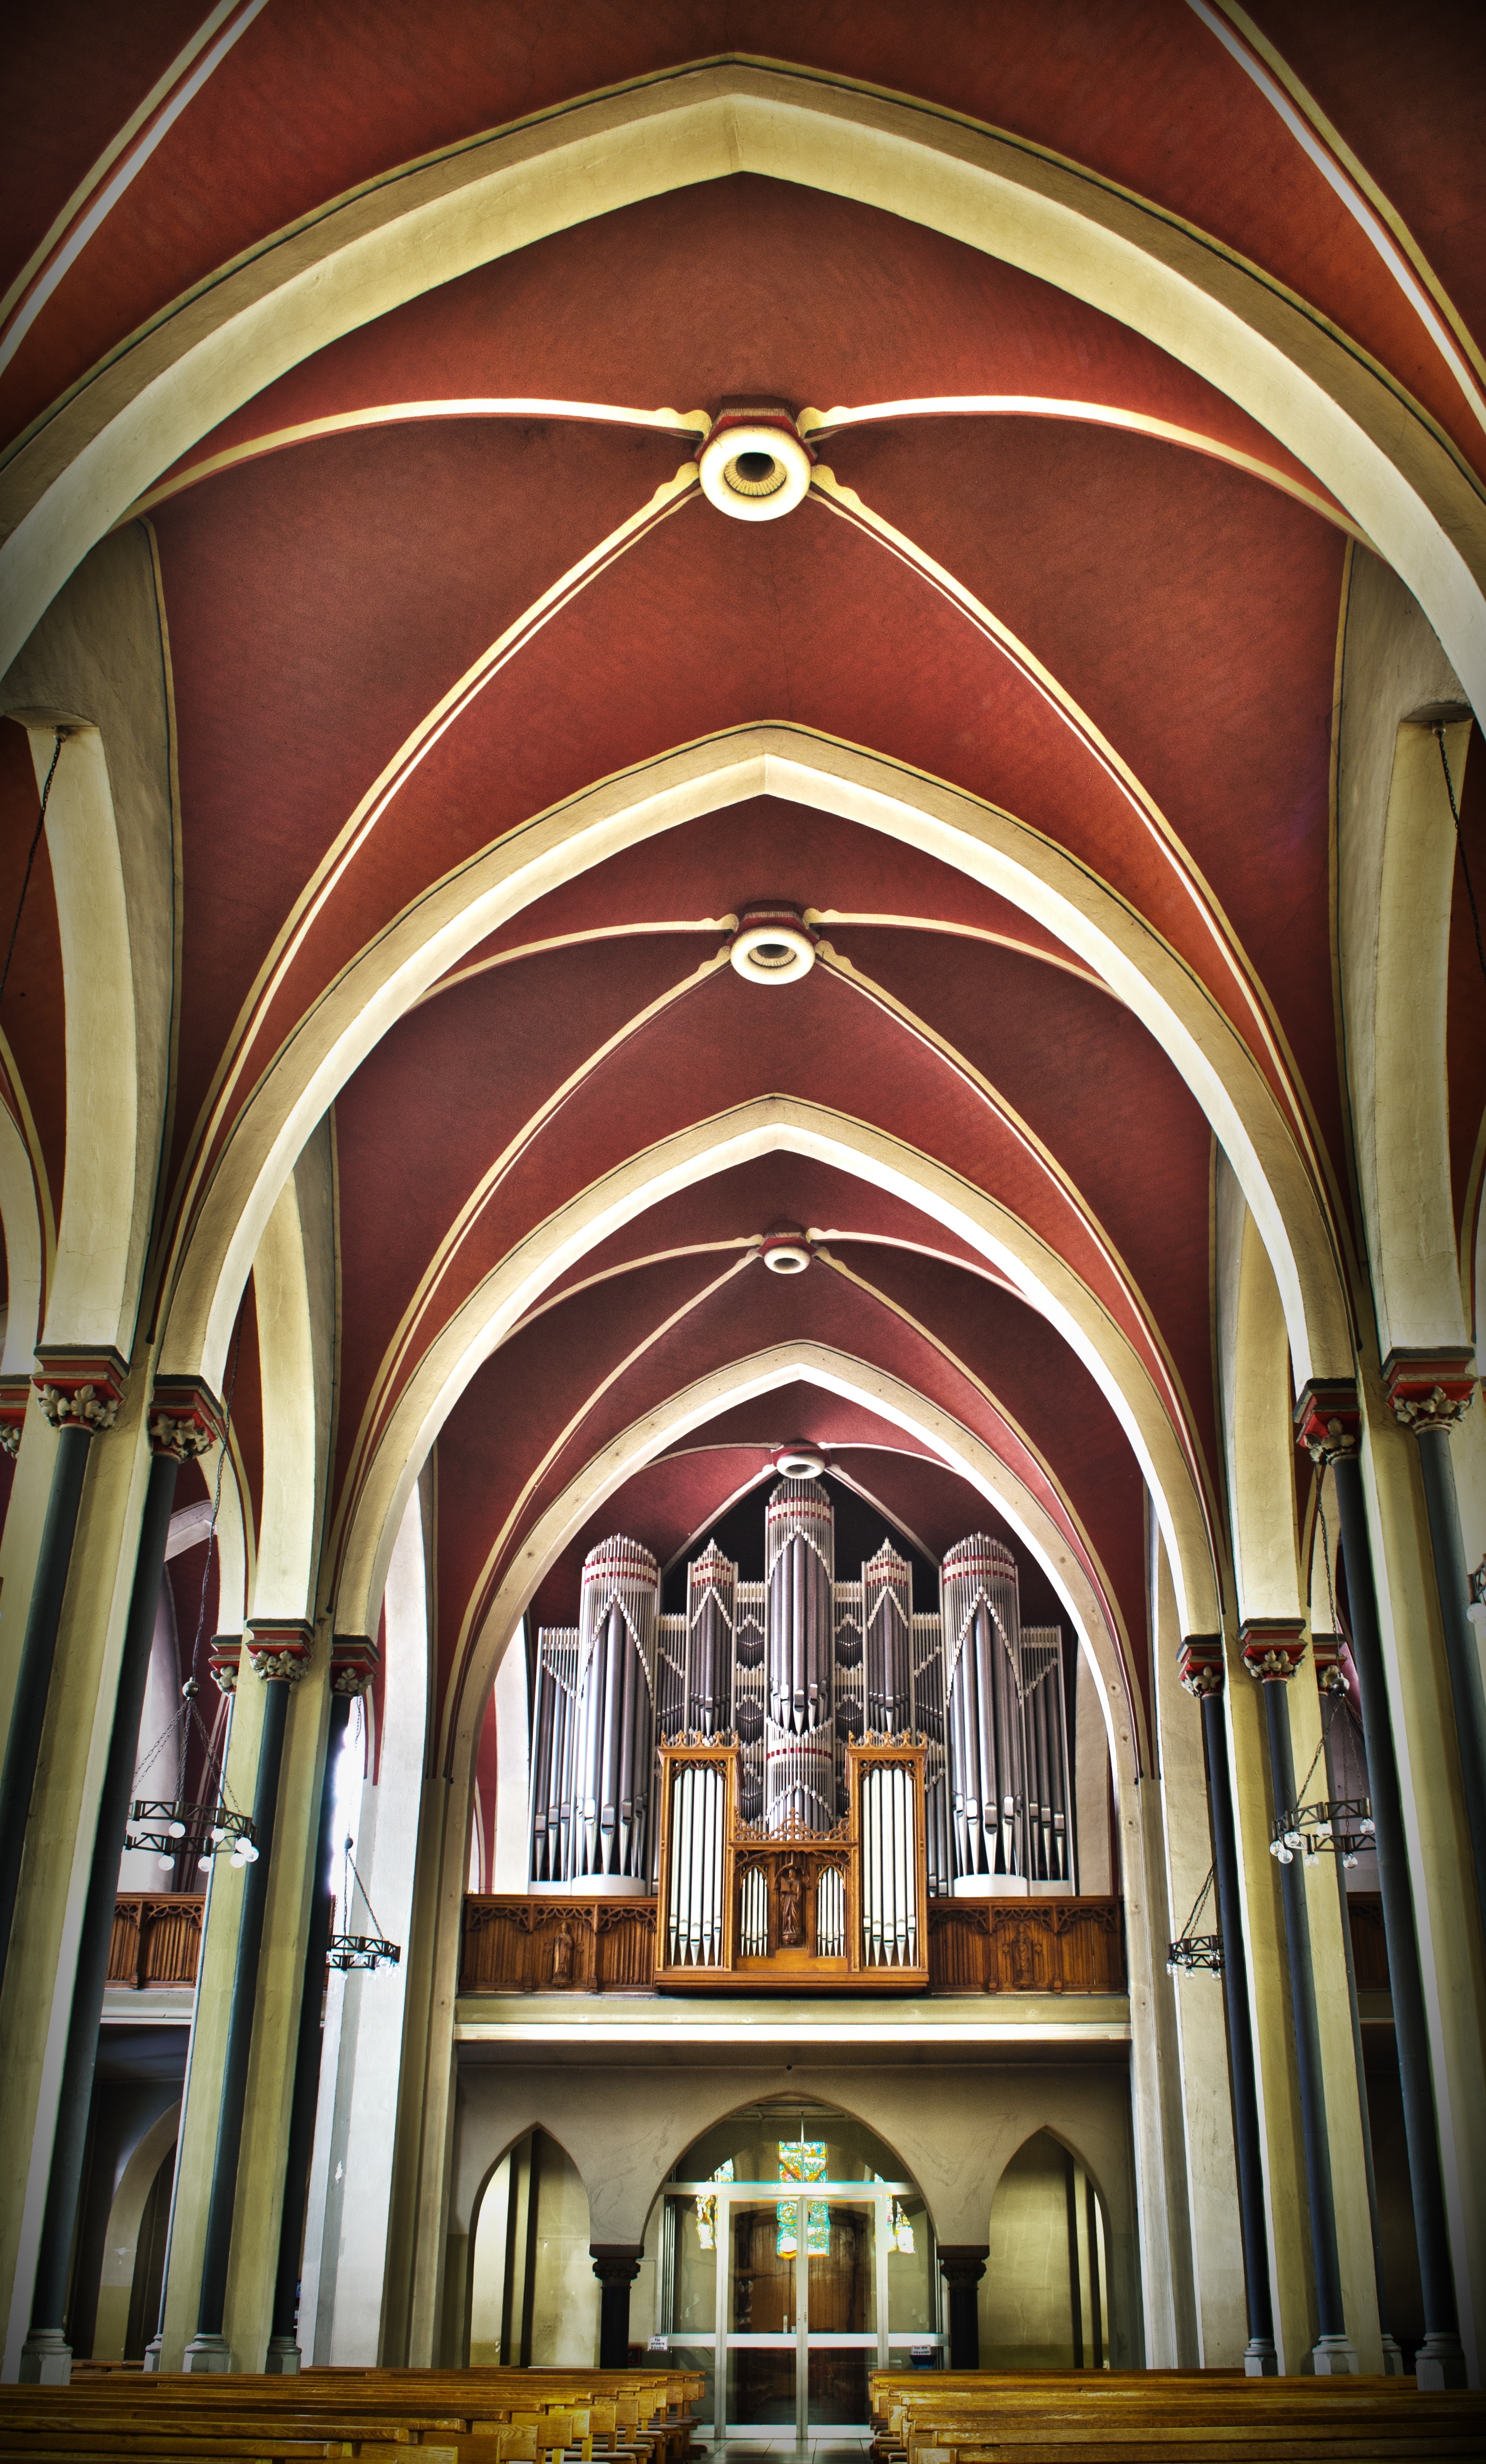 Church, Organ, Nave, St, Jacob, Germany, arch, architecture